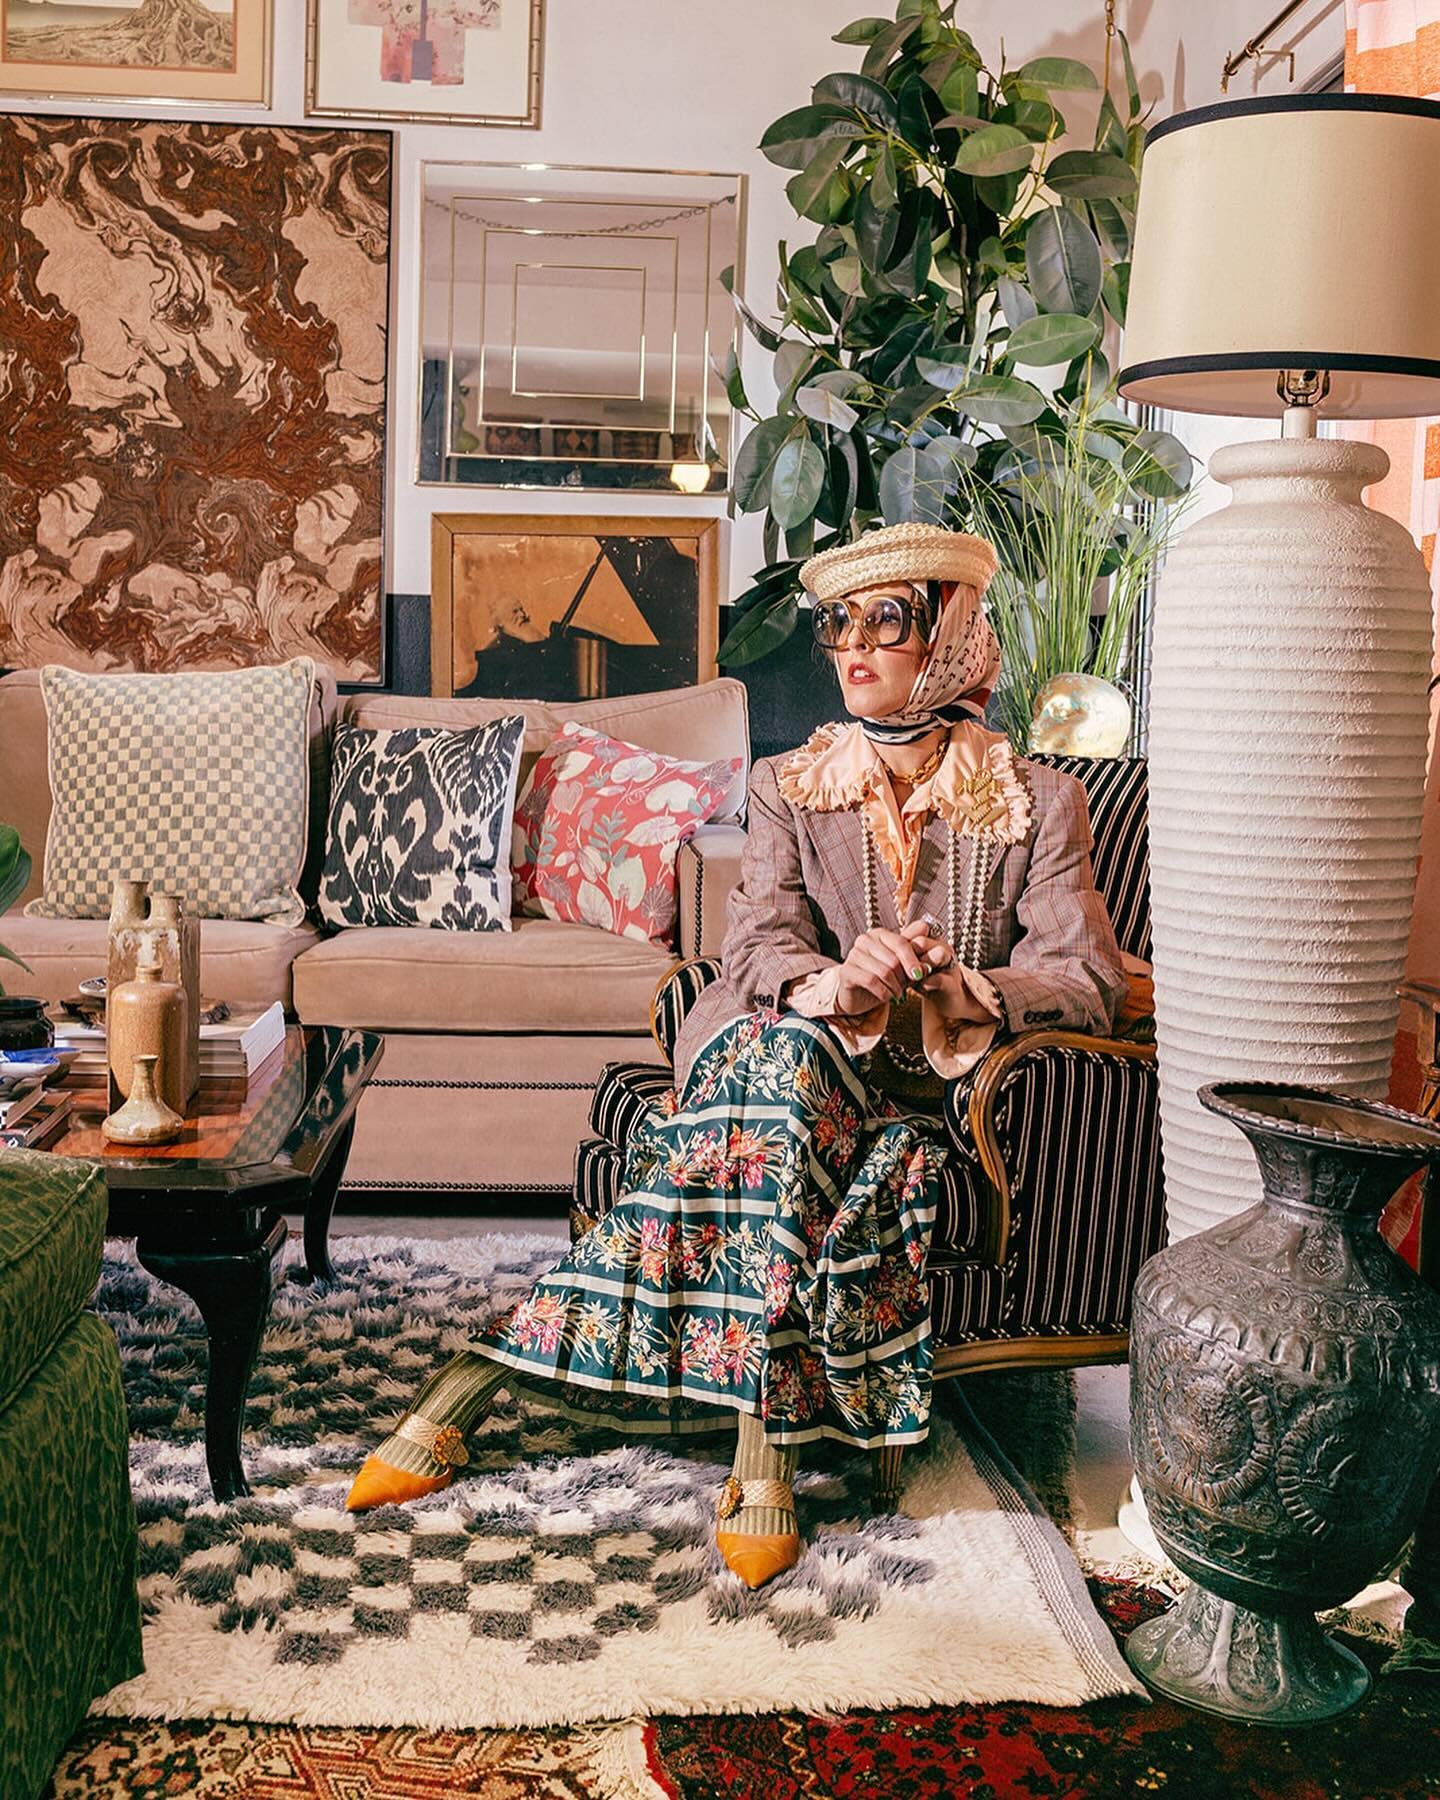 THE ECCENTRIC is all about MAXIMALISM and MAGIC ✨ @dana_gaydon